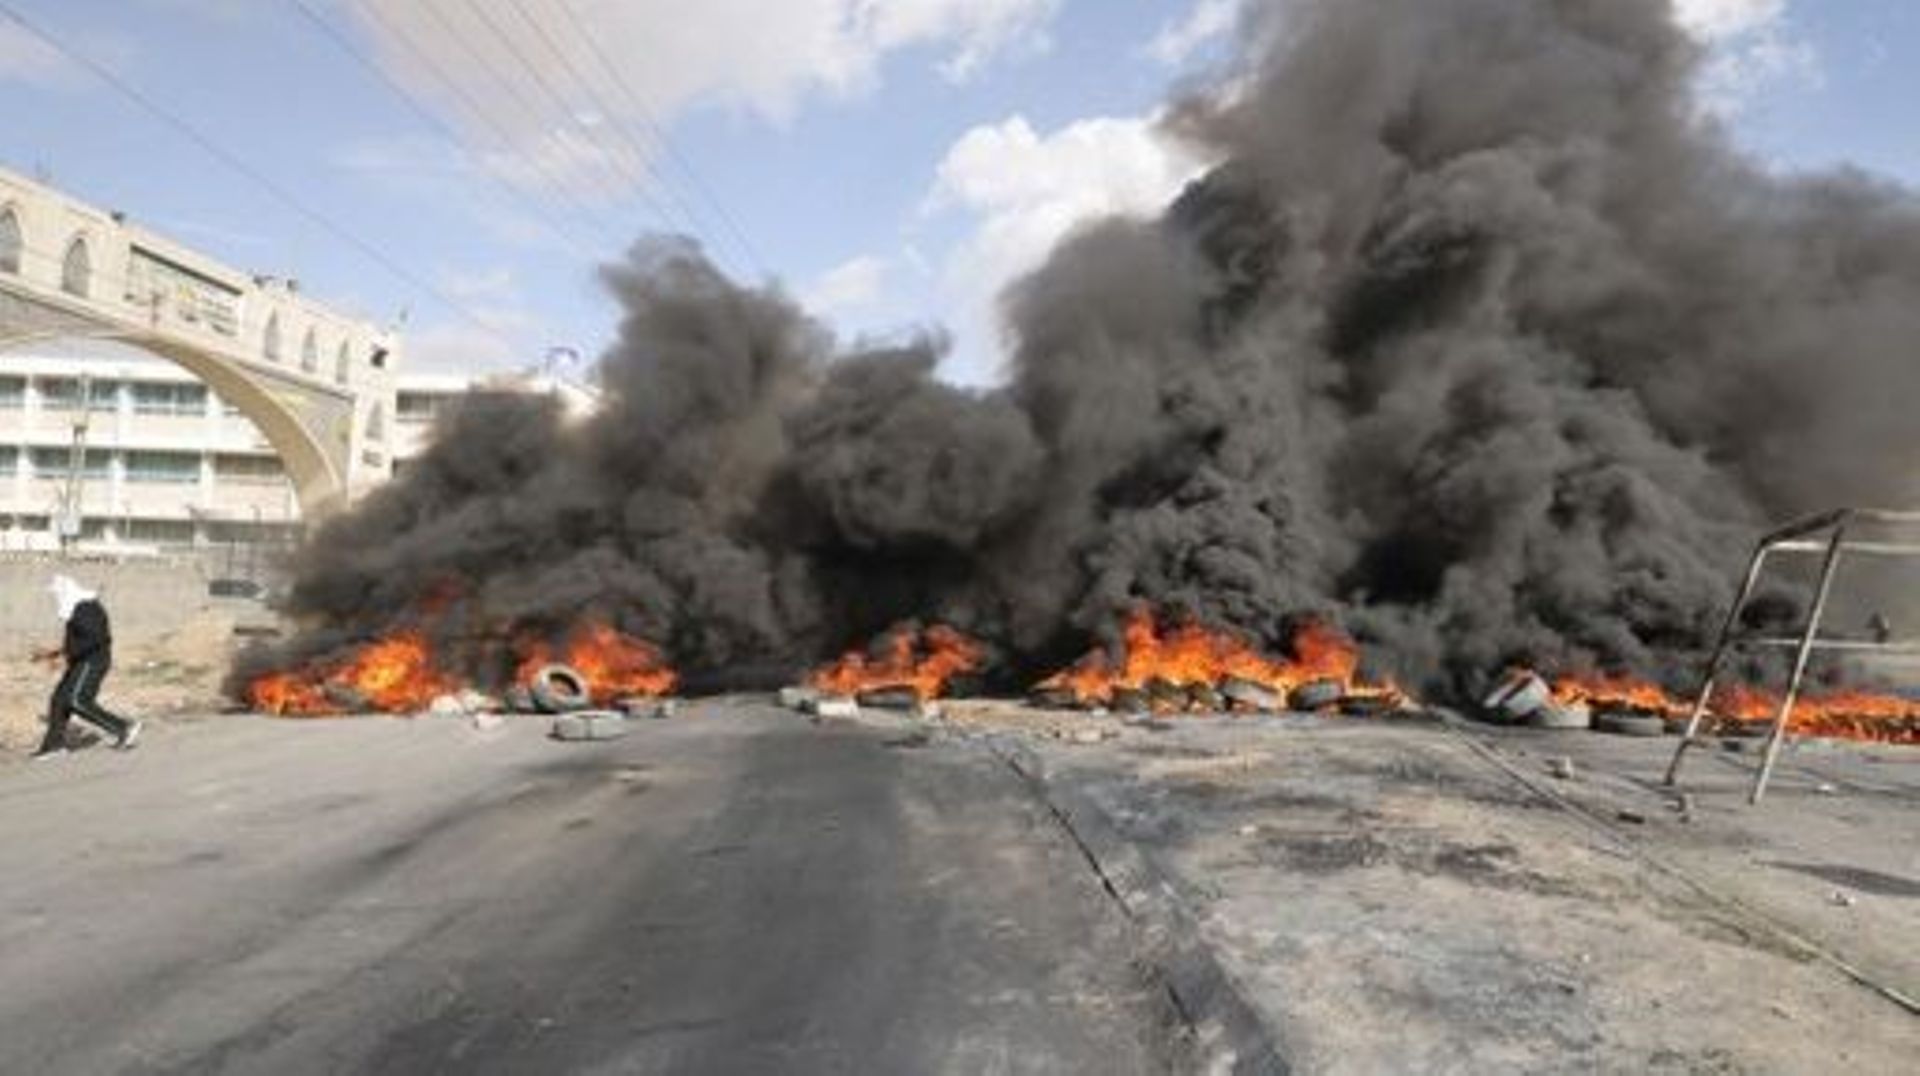 Palestinian protesters burn tyres to block a road leading into Jericho in the occupied West Bank, on February 6, 2023, following a raid in town by Israeli forces. Israeli forces on February 6 killed five alleged Palestinian gunmen in a raid in the occupie